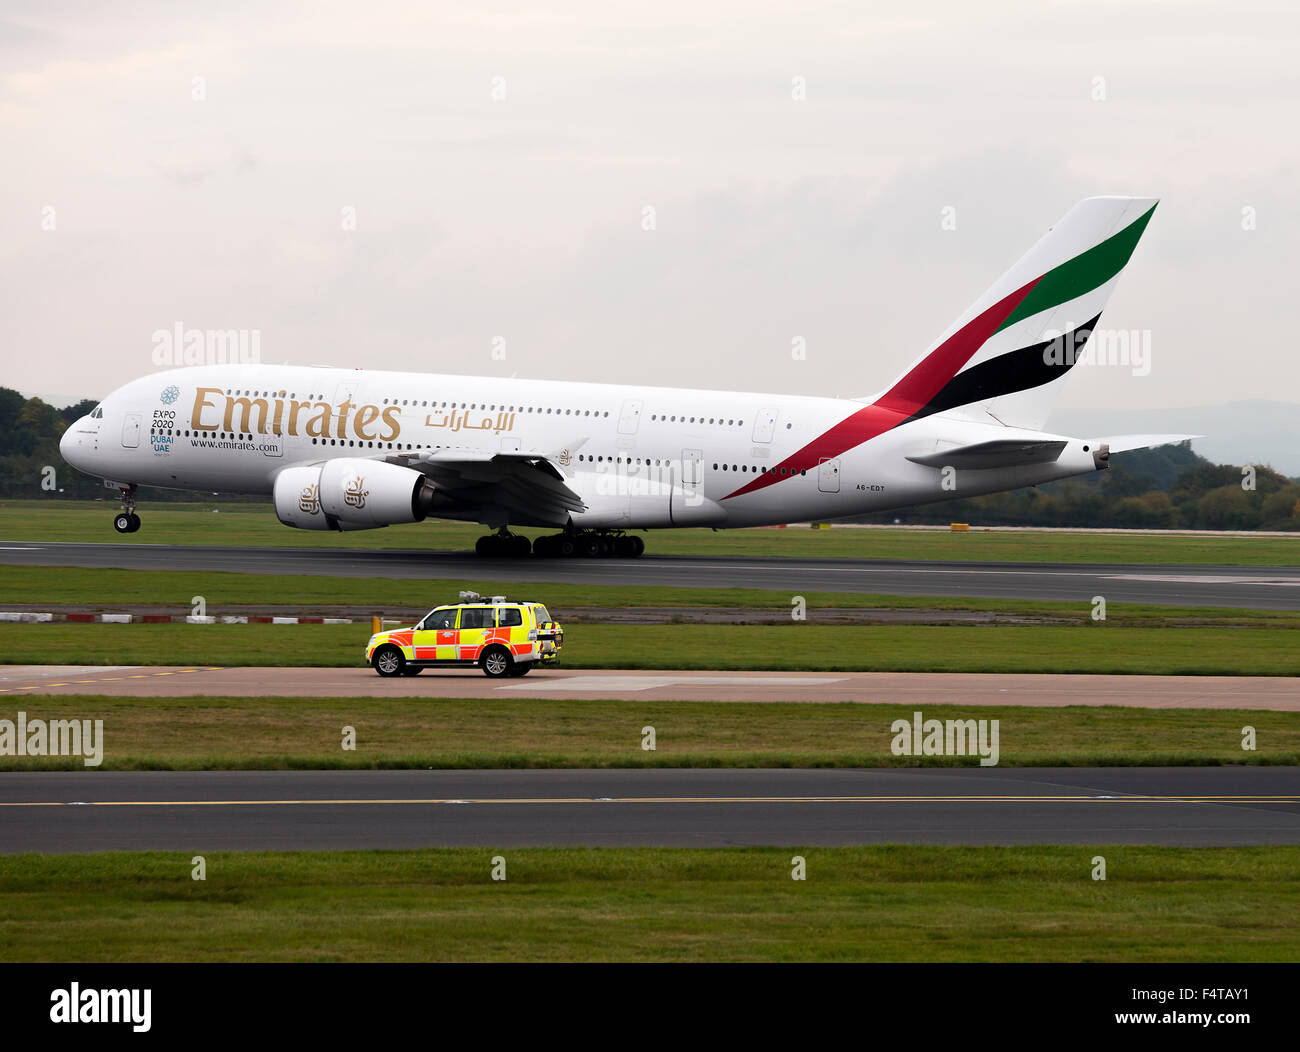 Emirates Airline Airbus A380-861 Airliner A6-EDT Landing at Manchester International Airport England United Kingdom UK Stock Photo